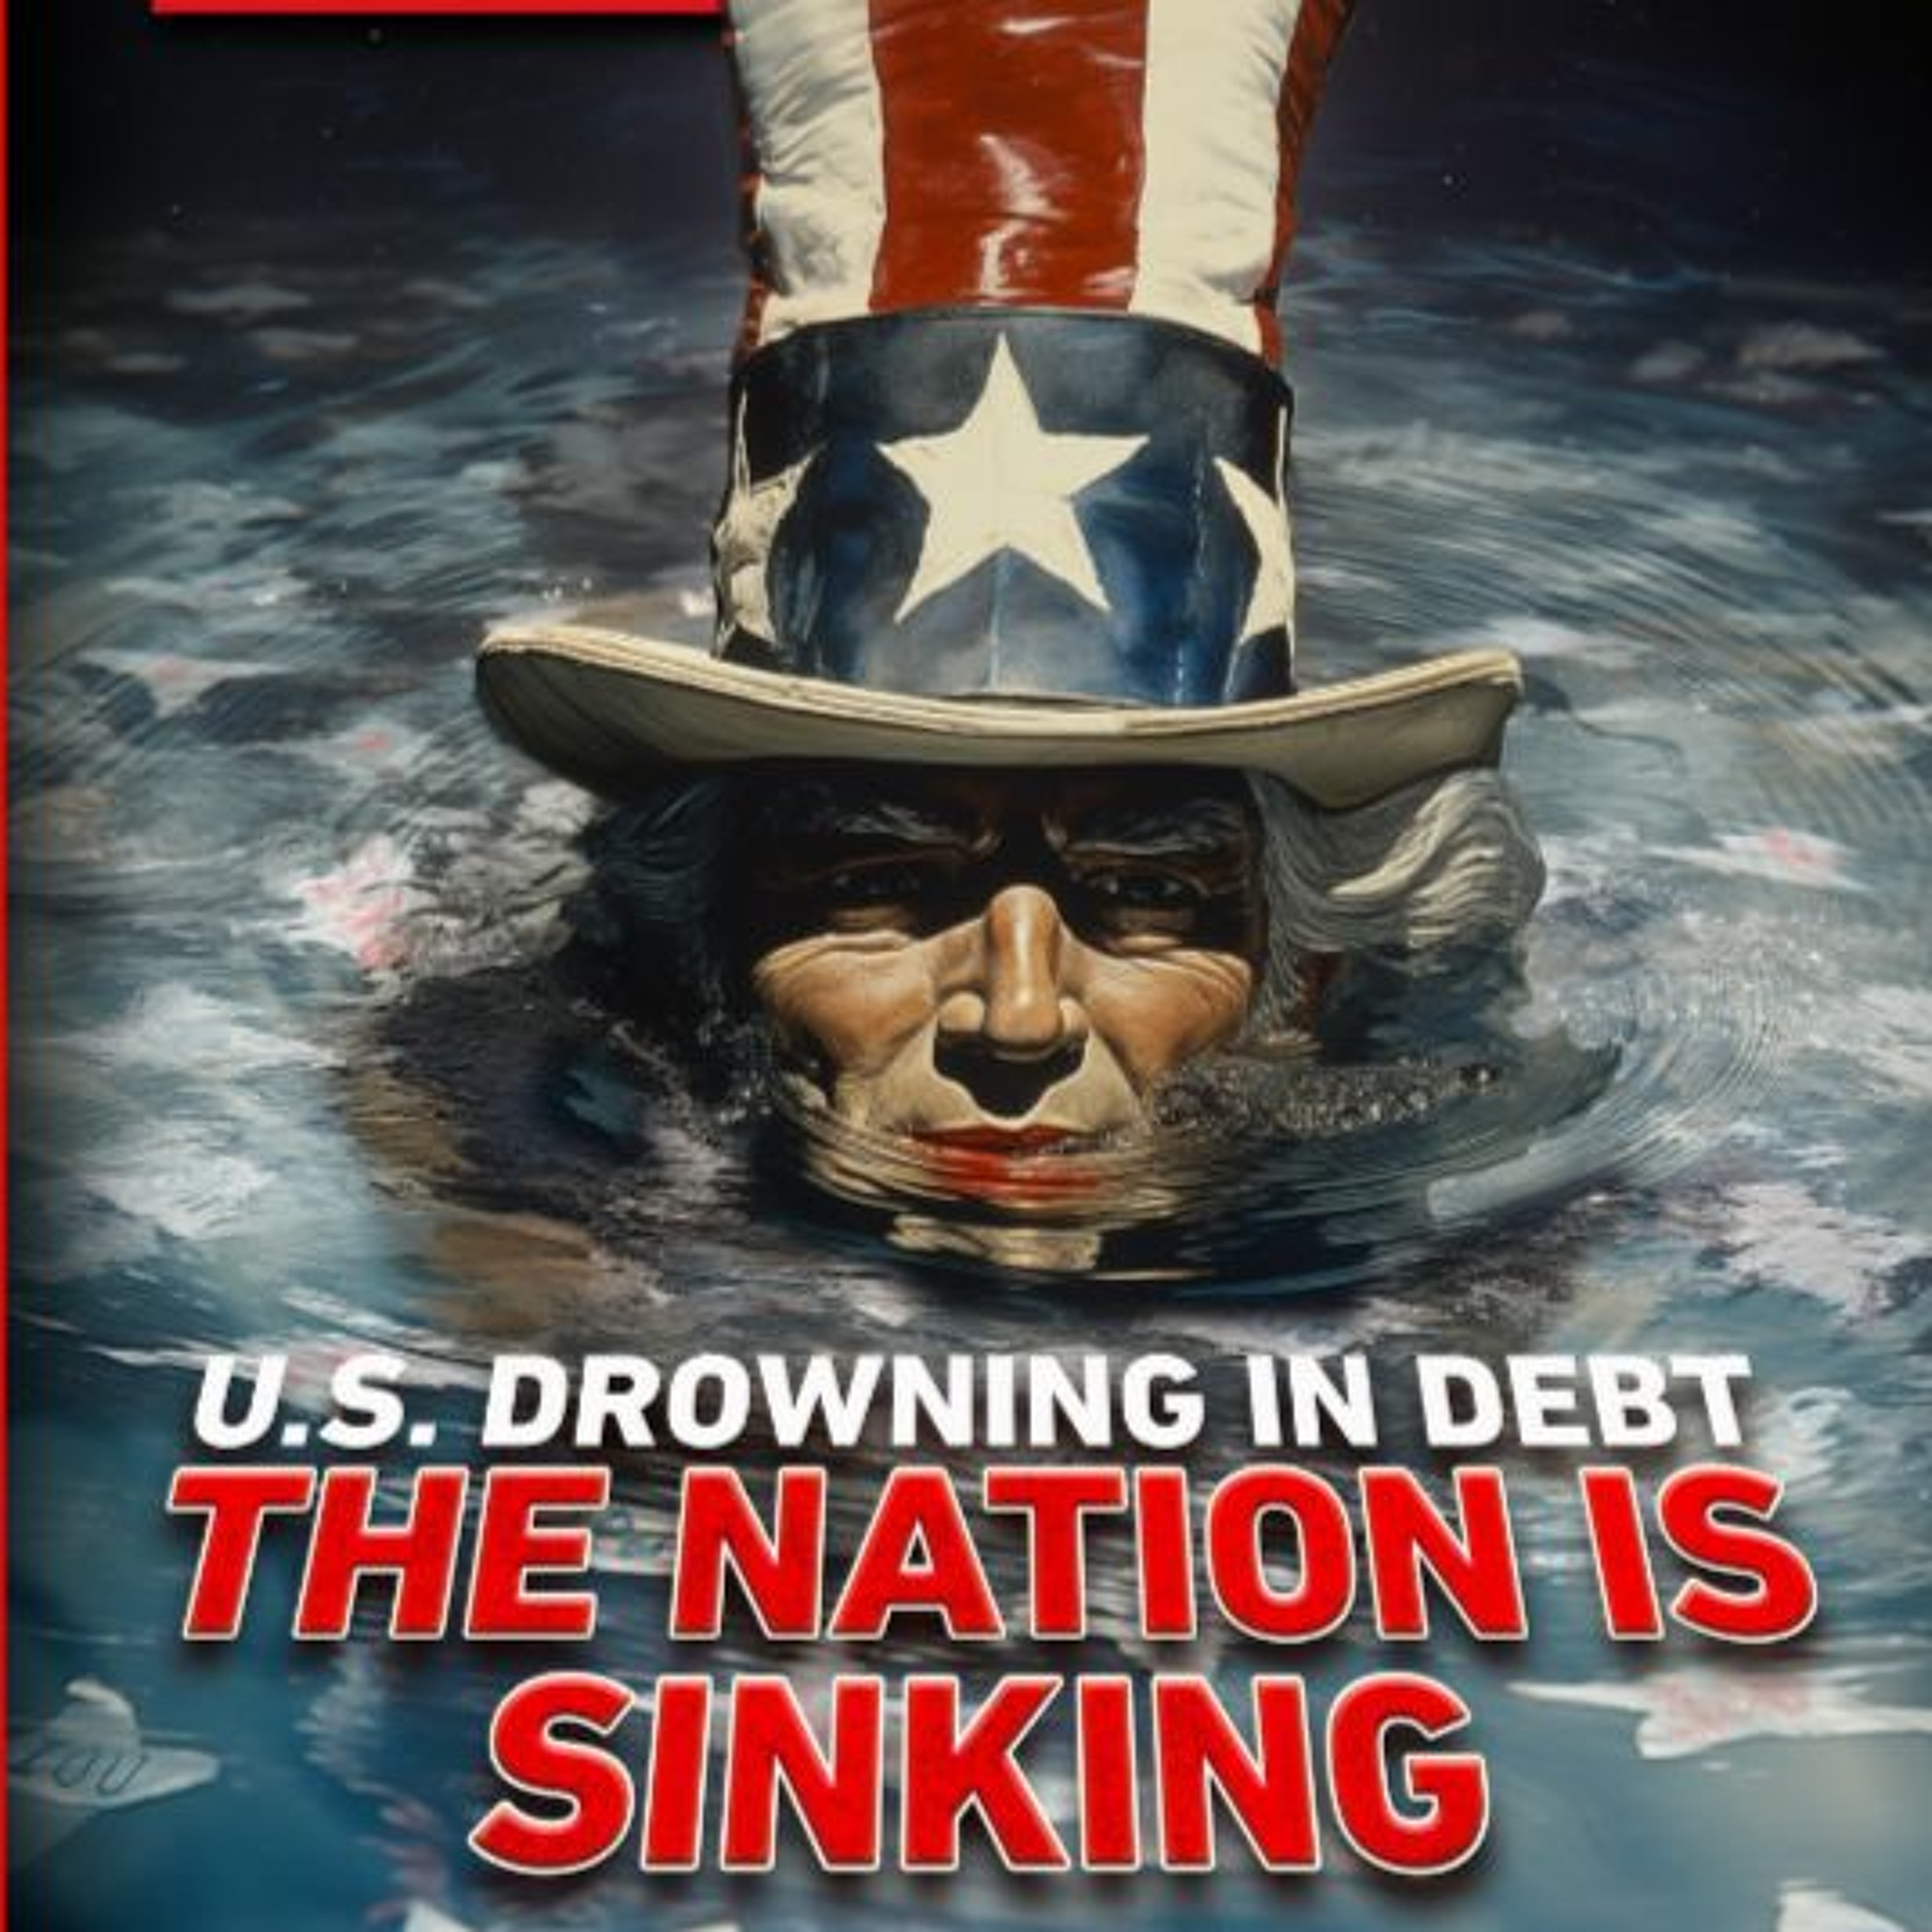 US DROWNING IN DEBT - THE NATION IS SINKING